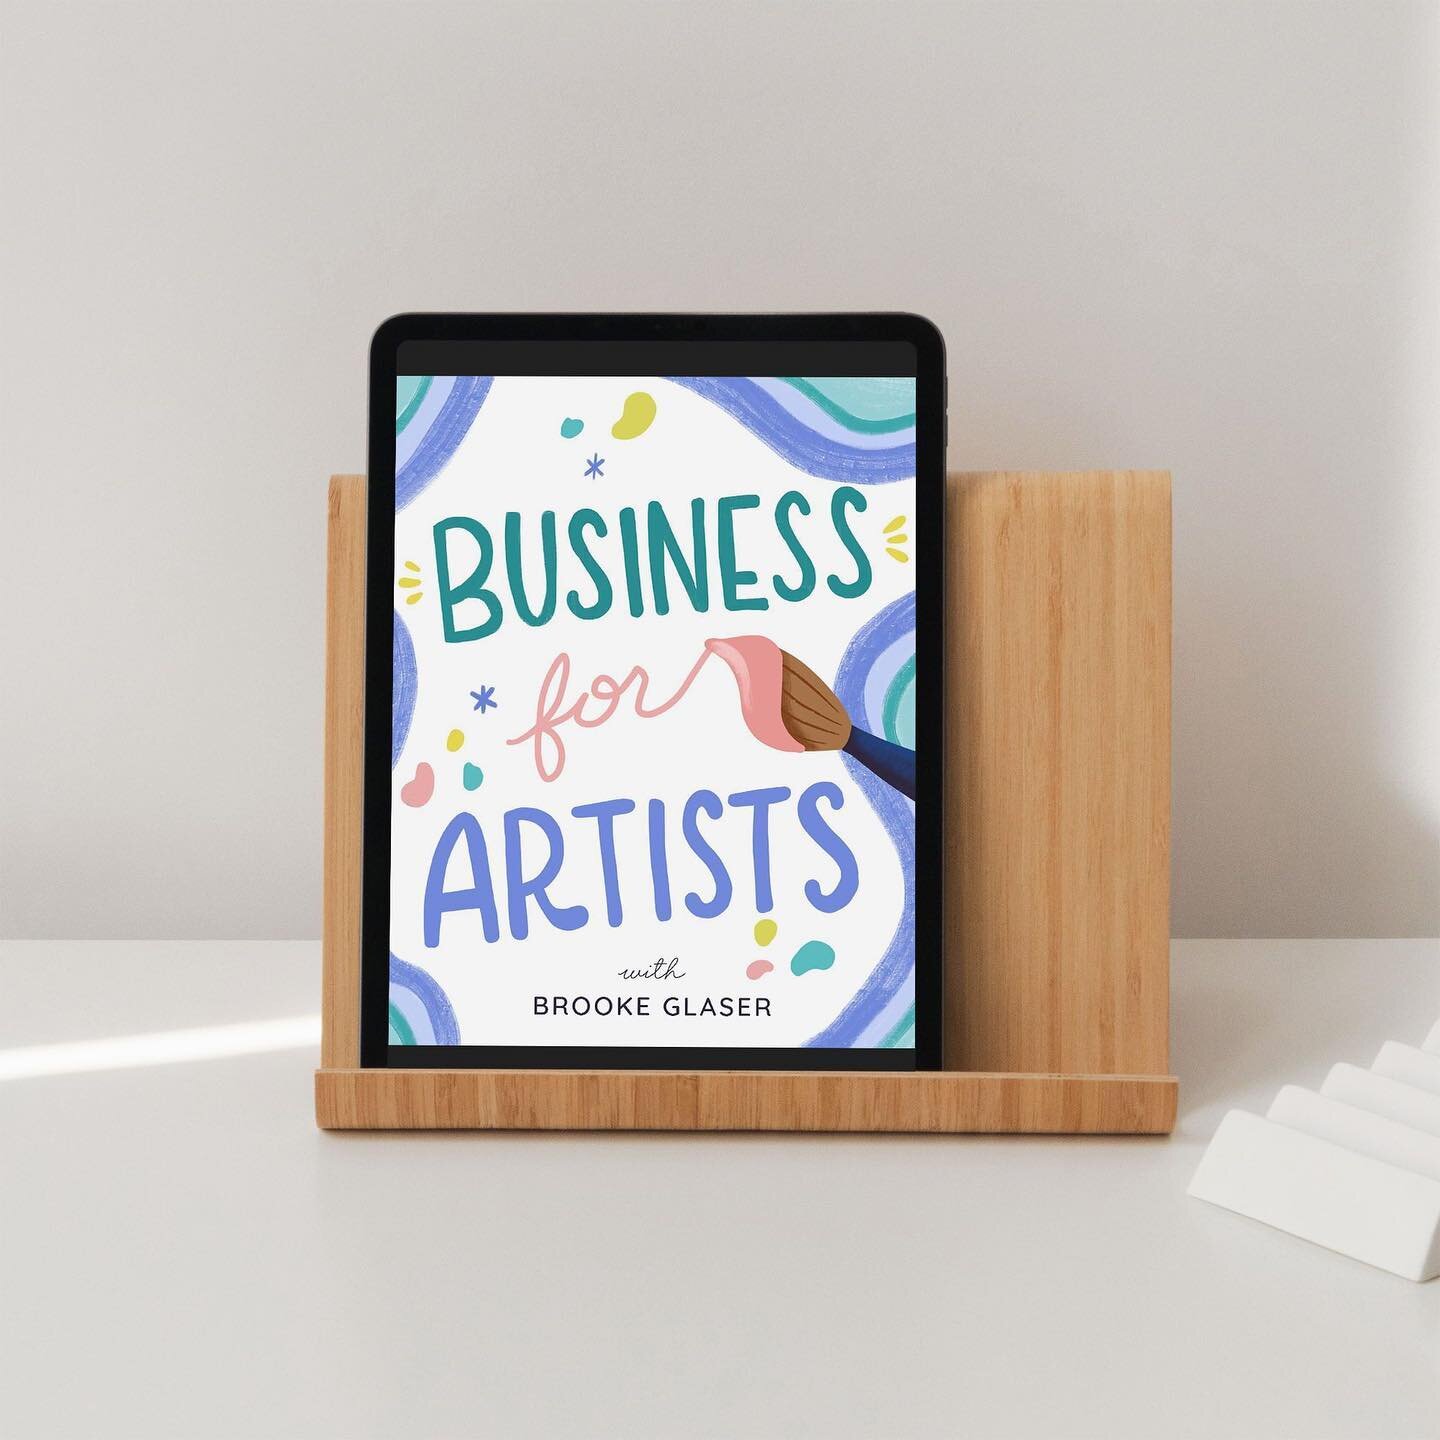 Happy Monday! Sharing a peek at this workbook by @paperplaygrounds, which is available now as a resource for artists on her website. We had a great time working together to make her exercises clear and help her artists work through their business ide